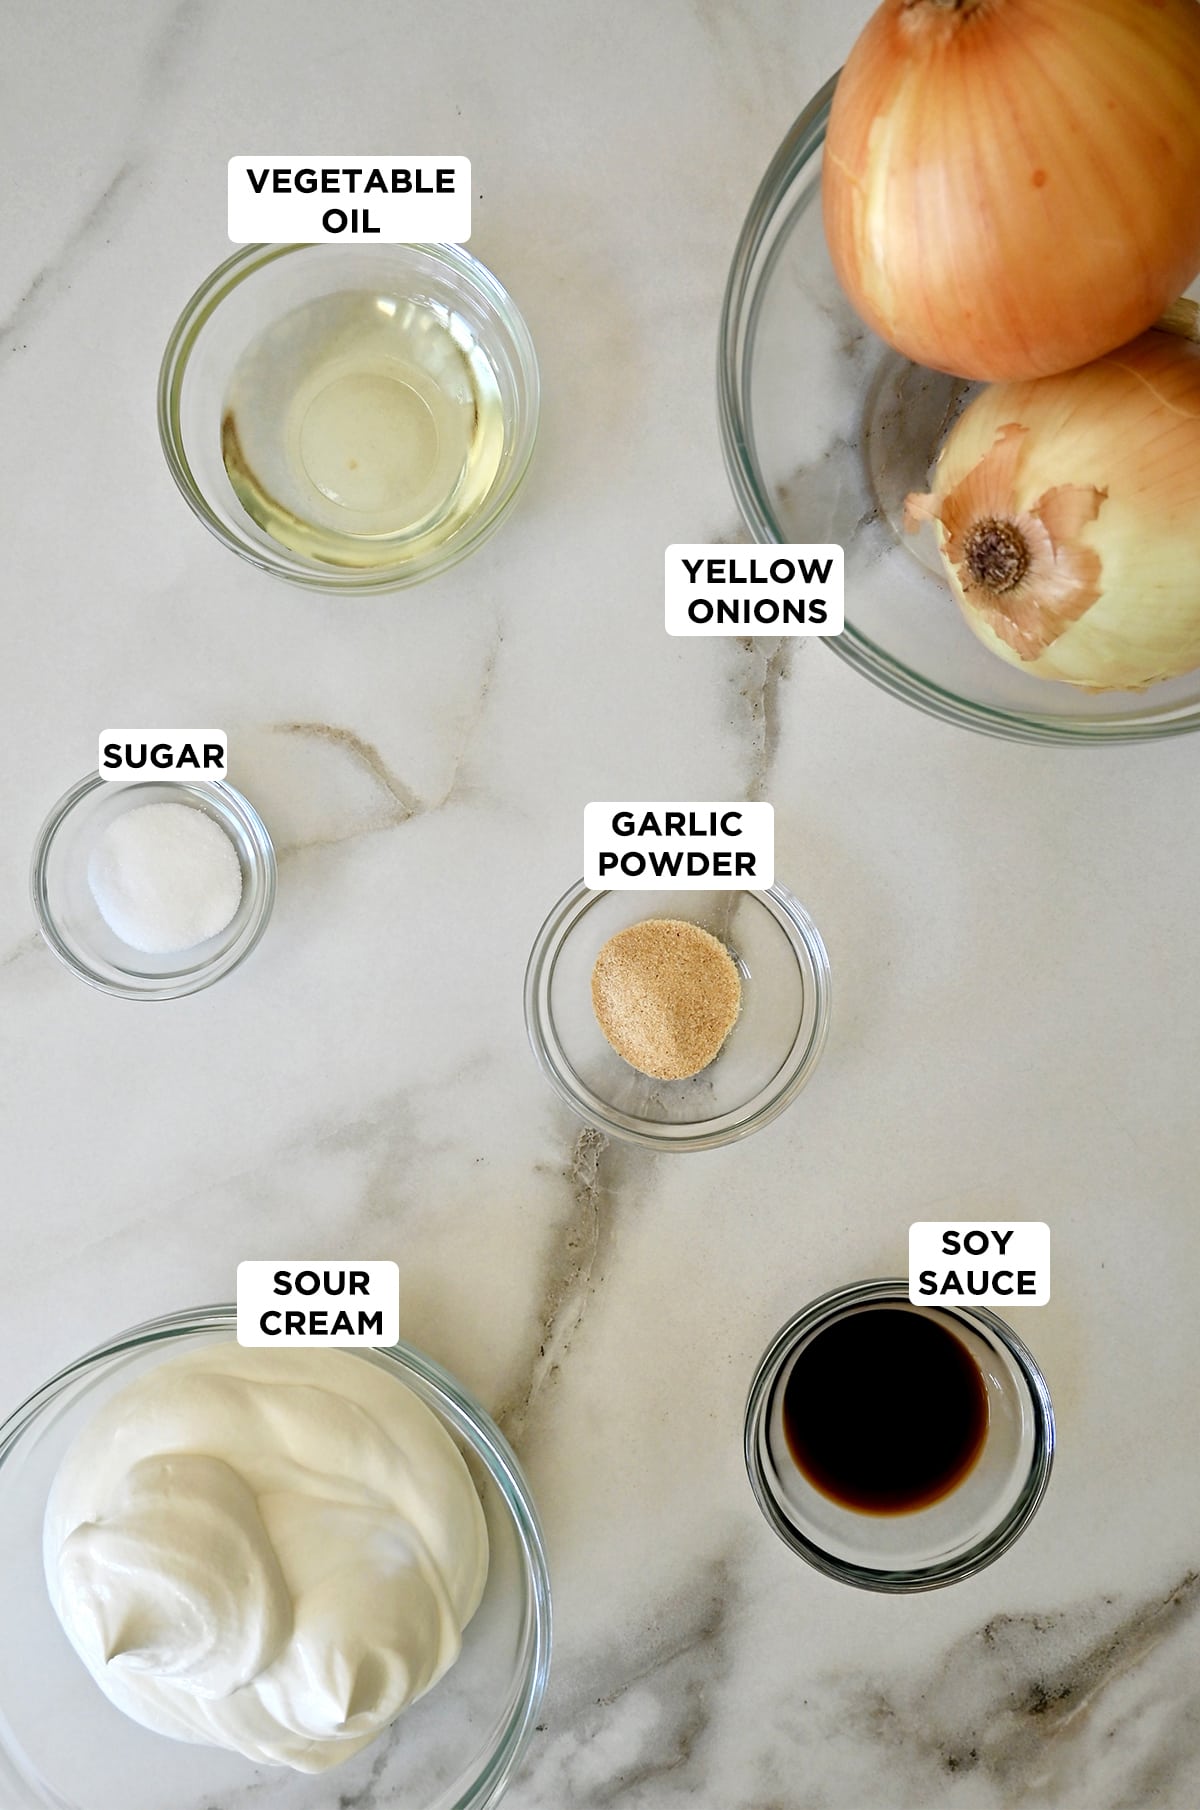 Clear glass bowls containing the ingredients for French onion dip, including two yellow onions, vegetable oil, garlic powder, soy sauce, sour cream and sugar.